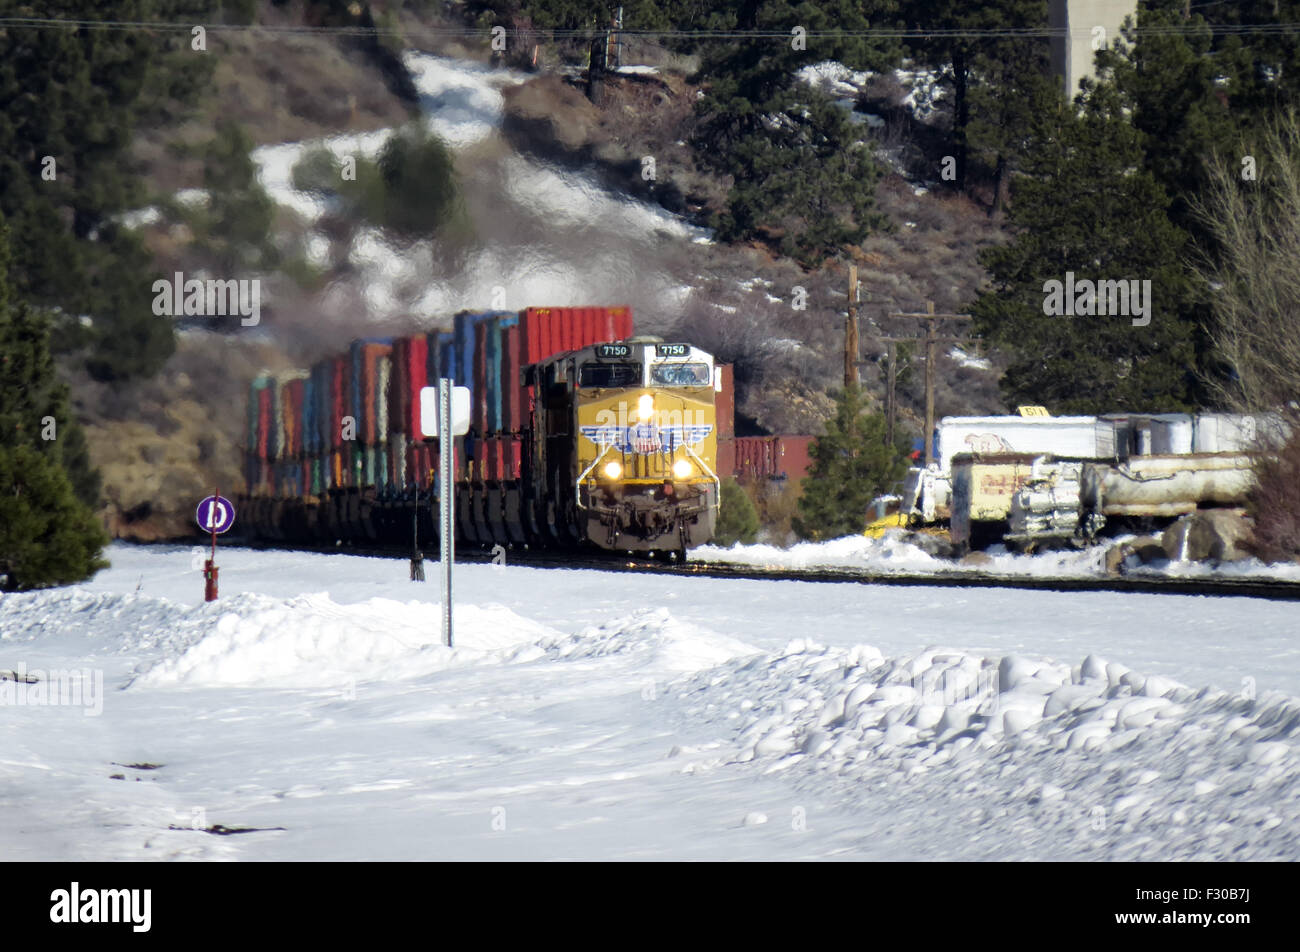 Trains in the Snow in Truckee, California Stock Photo